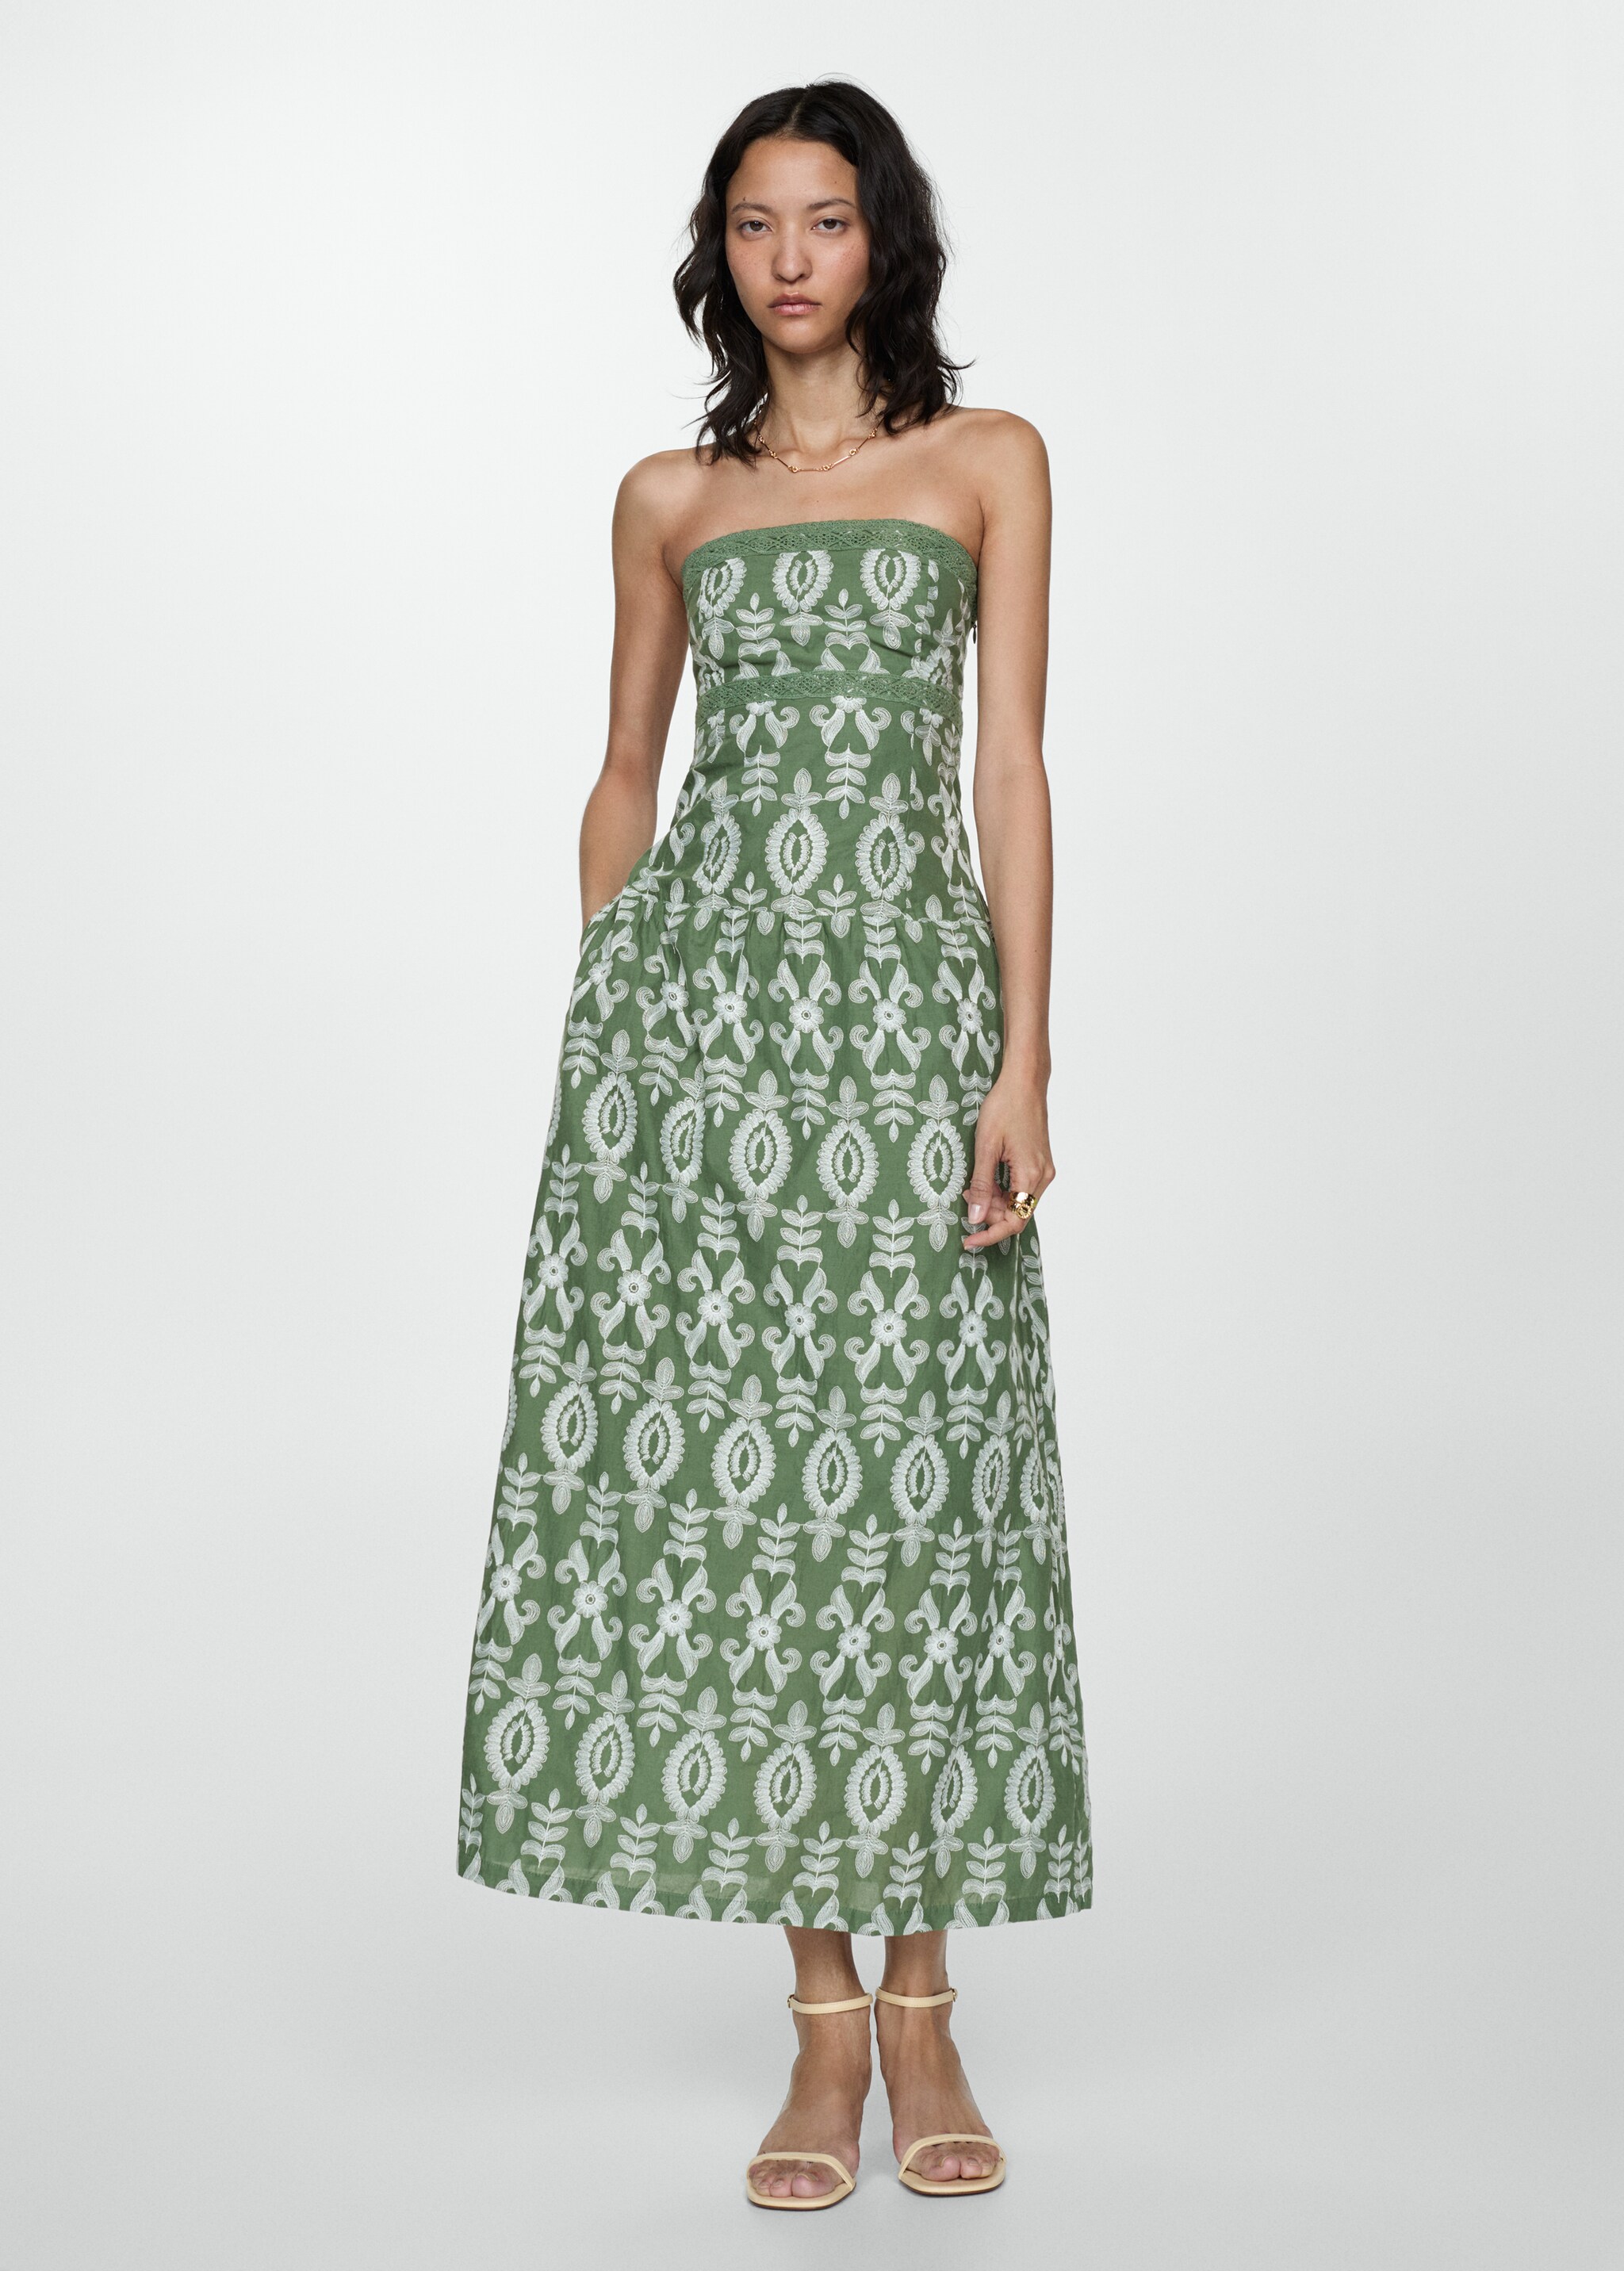 Strapless embroidered dress - General plane